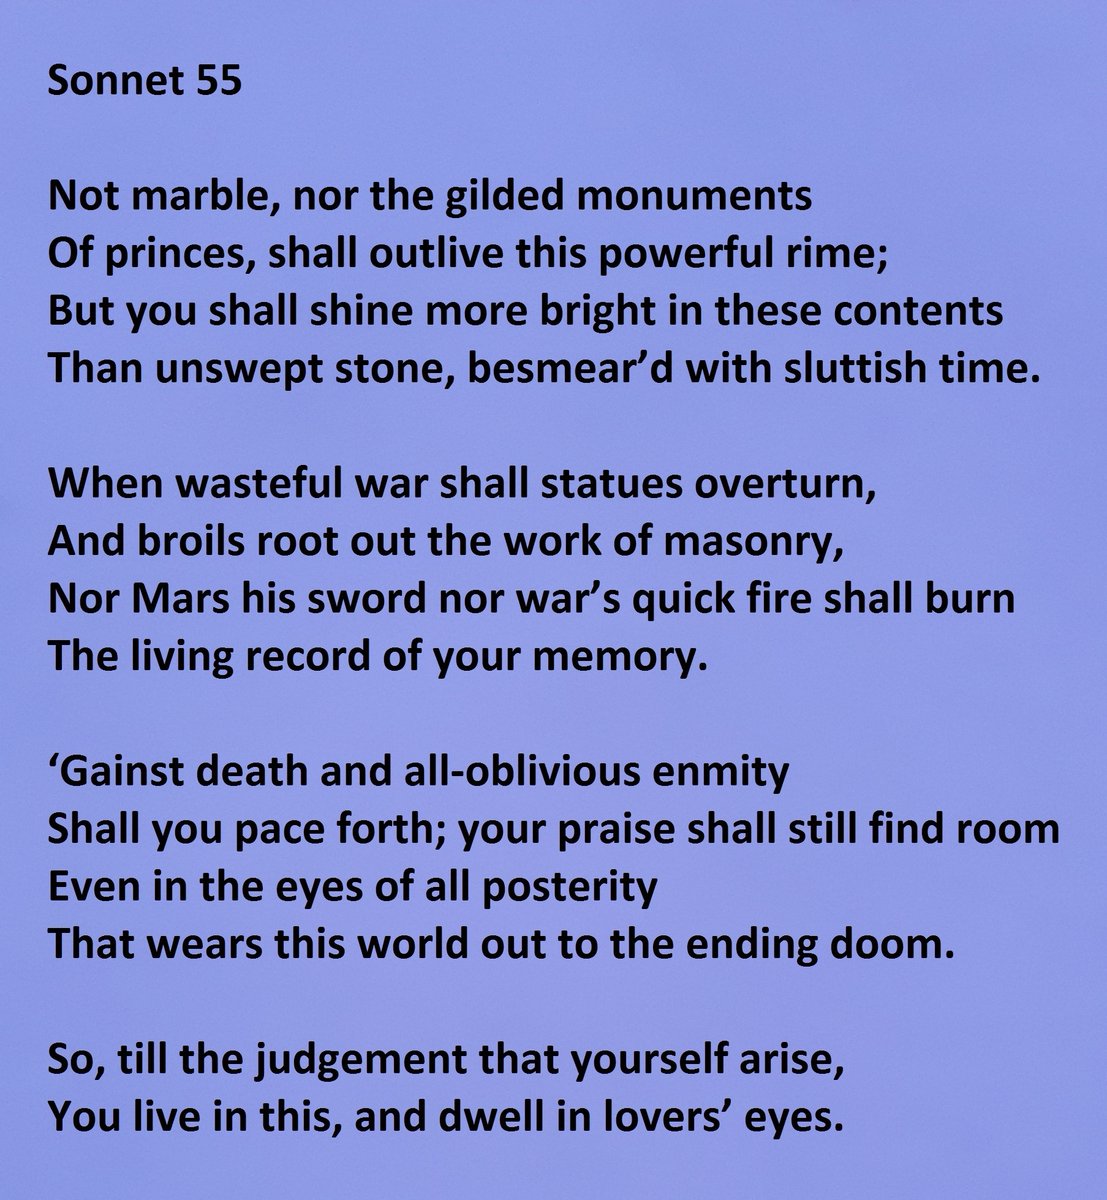 Sonnet 55 by William Shakespeare "Not marble, nor the gilded monuments"